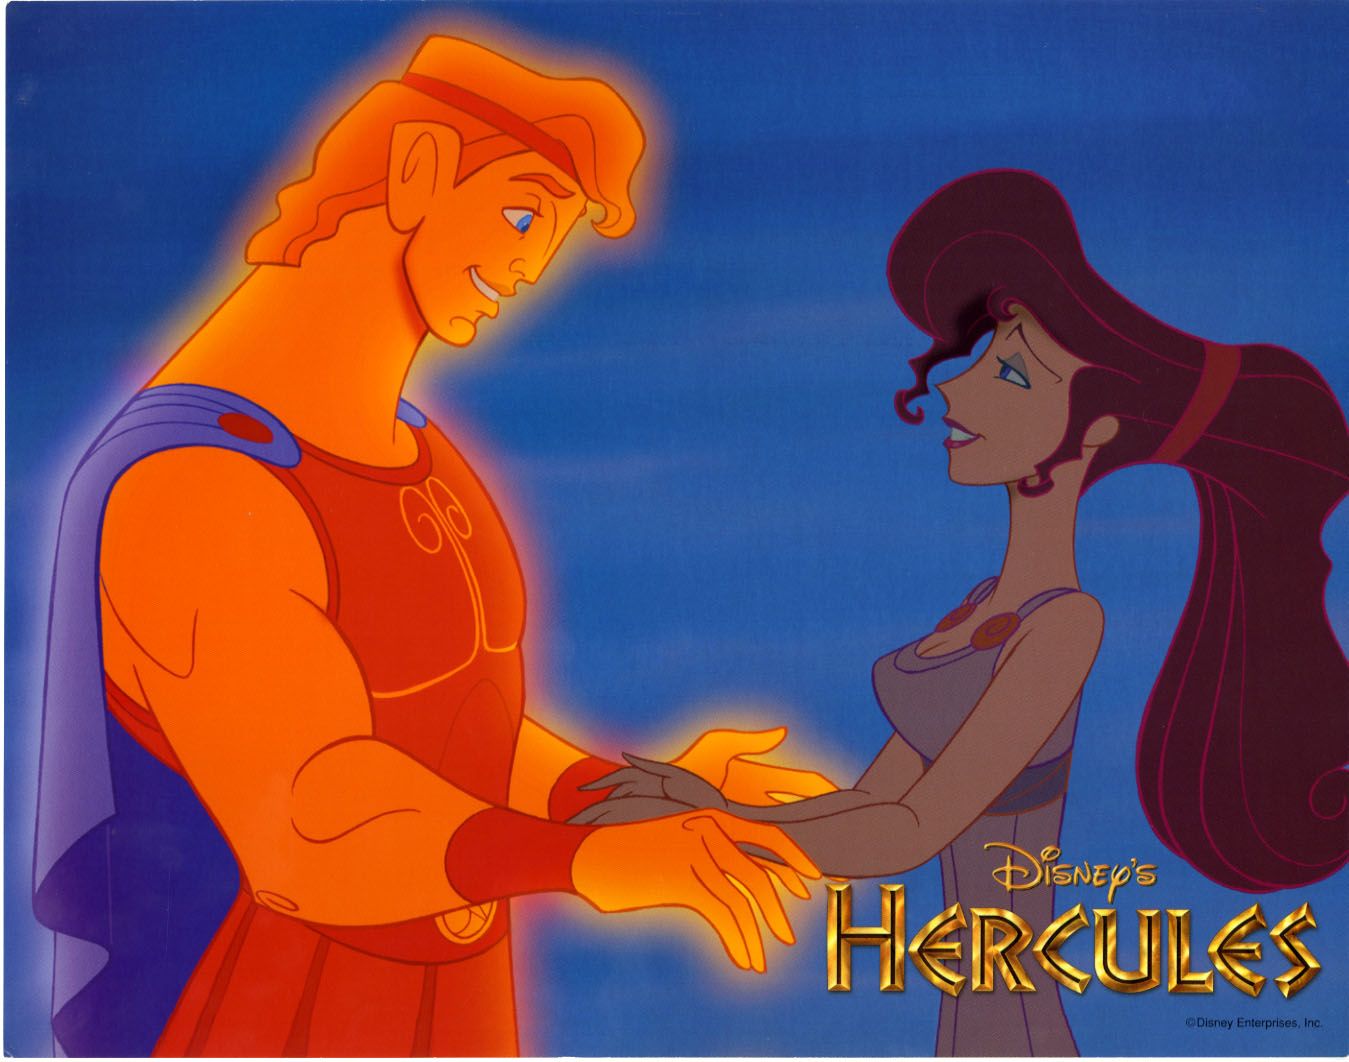 Hercules Disney the Movie HD Wallpaper for HTC One M9